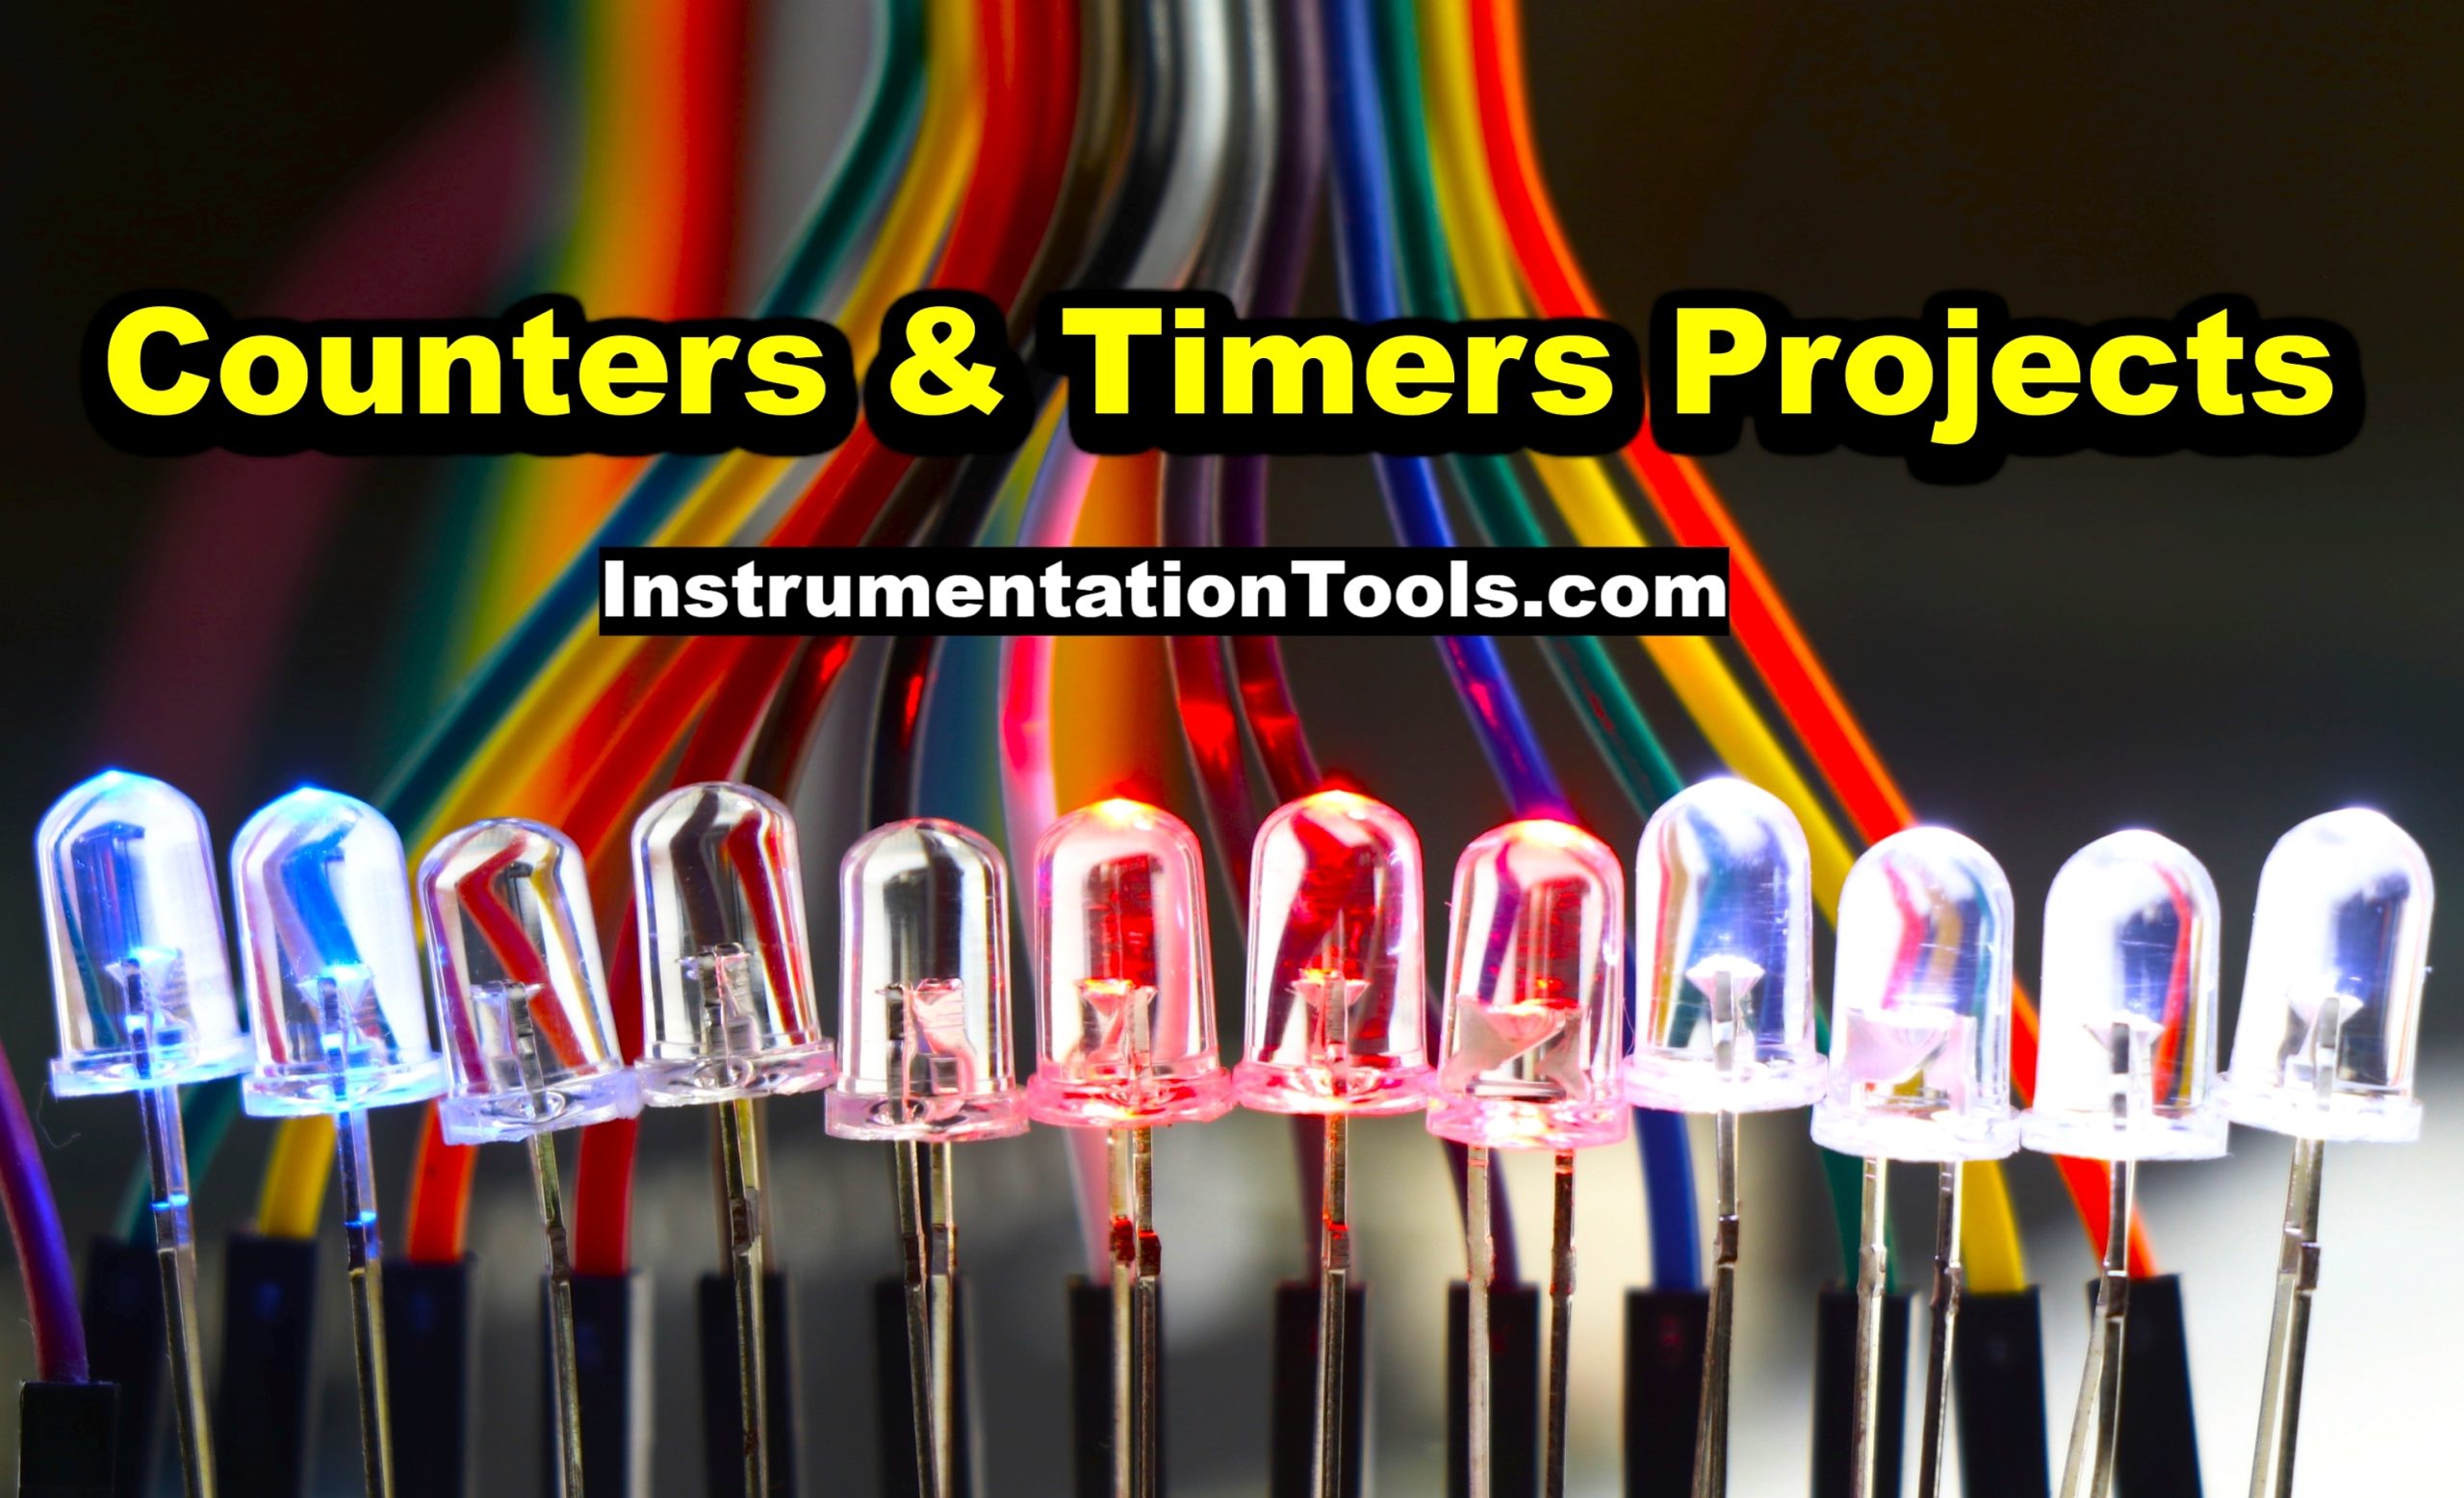 Counters and Timers Projects Using Analog Electronic Devices